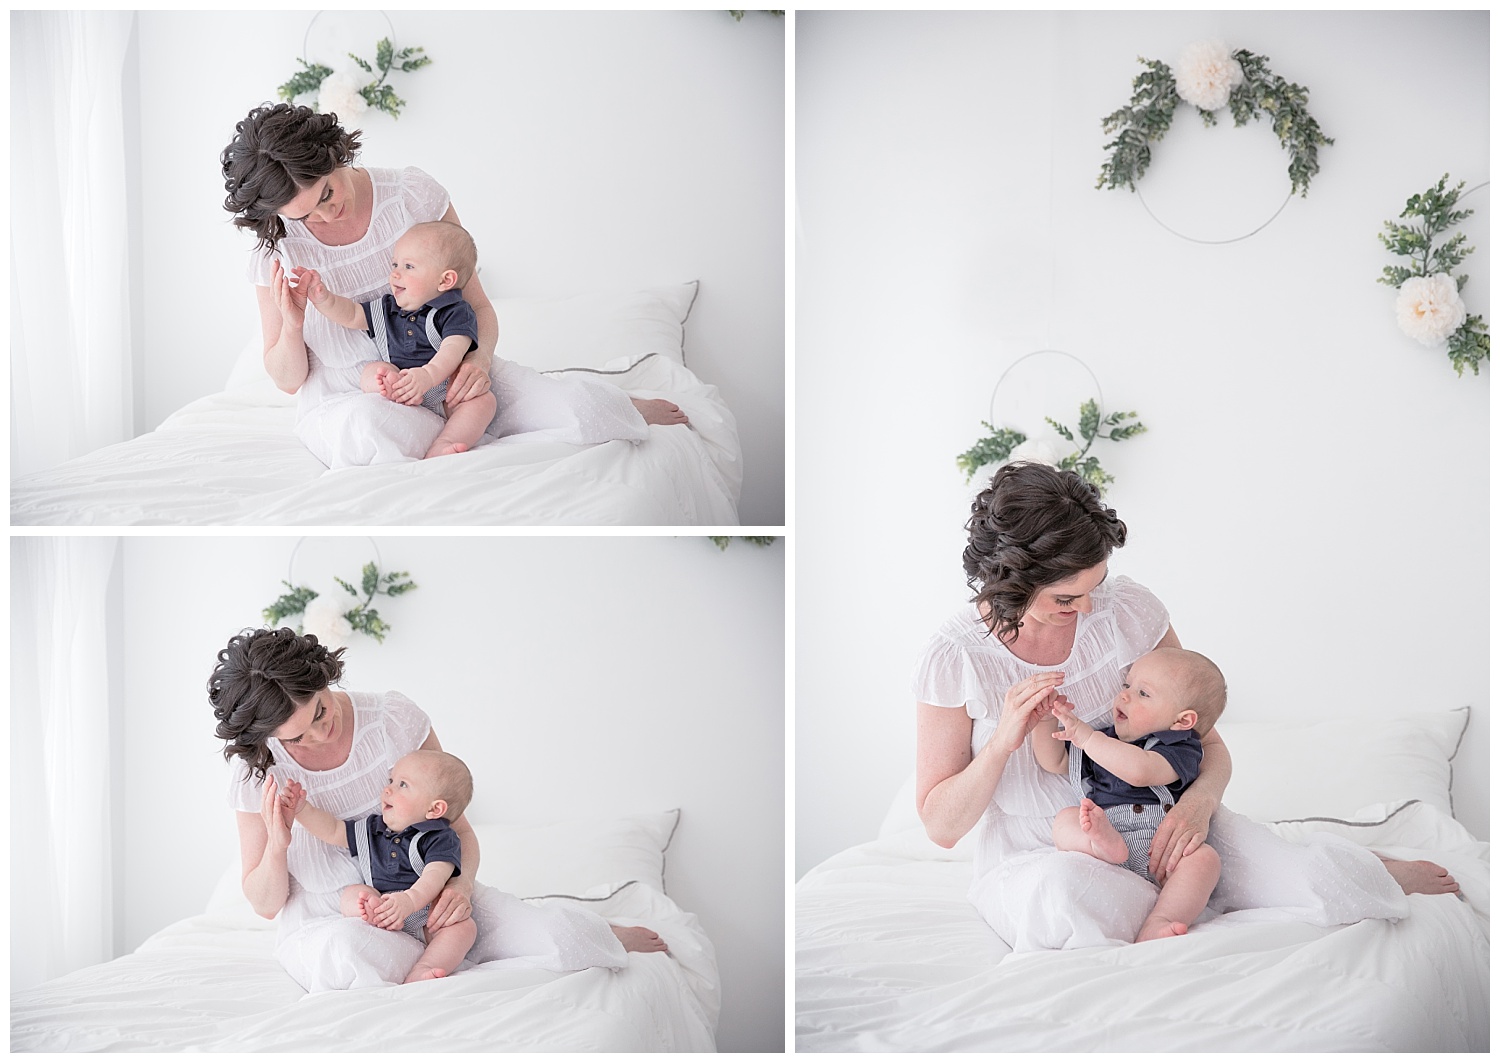 mom playing hand puppets with son while wearing a white dress and son in a blue shirt on a white bed in burlington new jersey studio